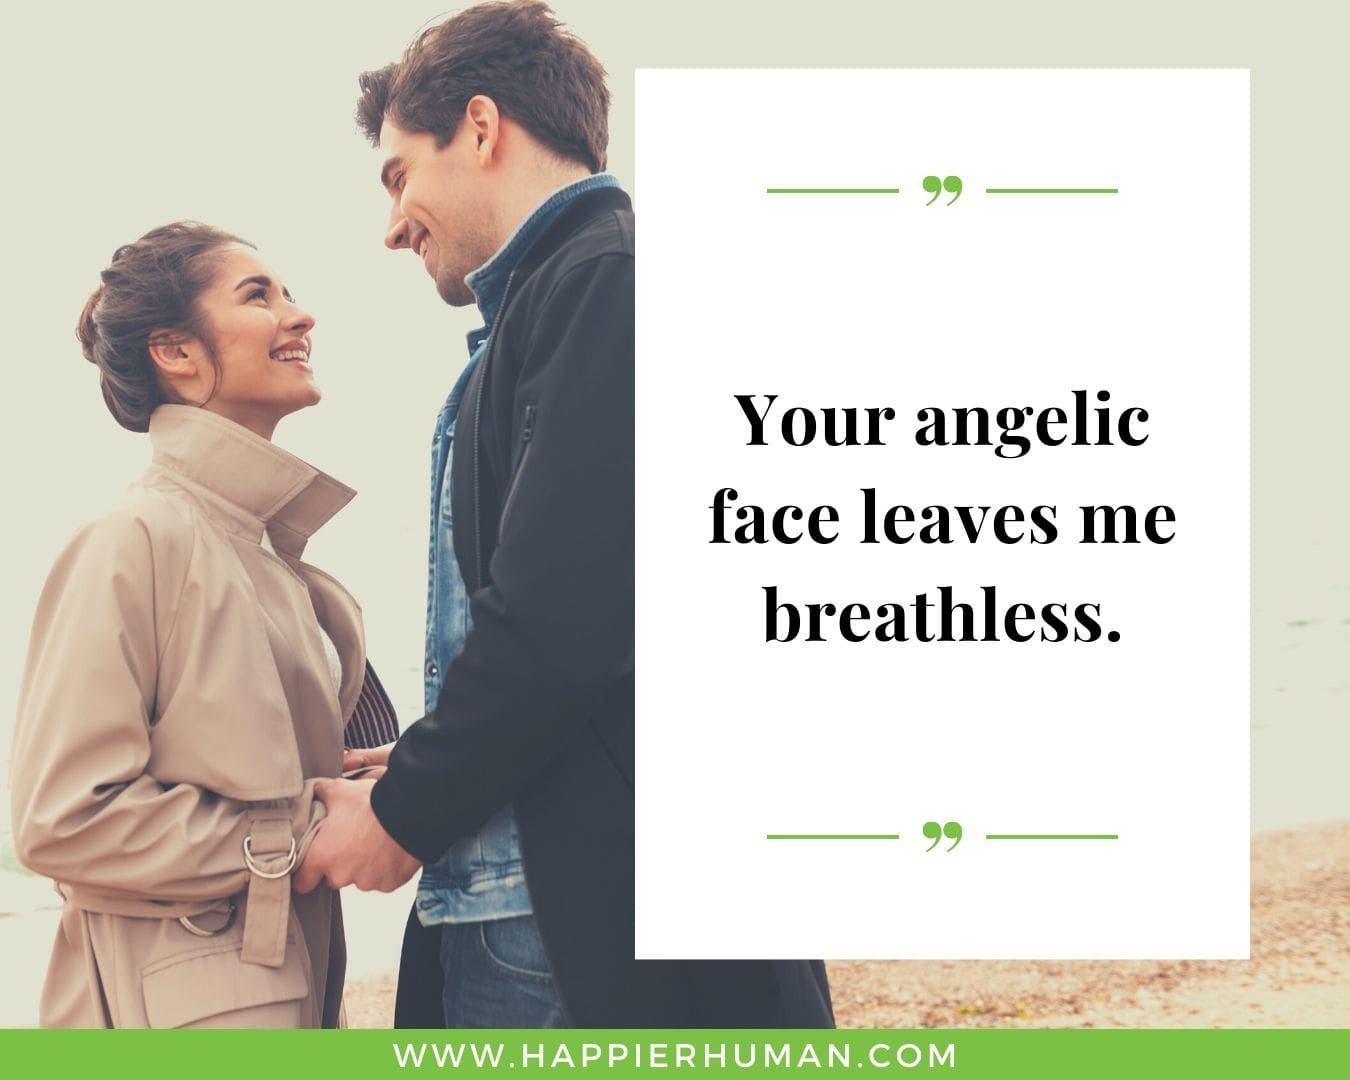 Short, Deep Love Quotes for Her - “Your angelic face leaves me breathless.”